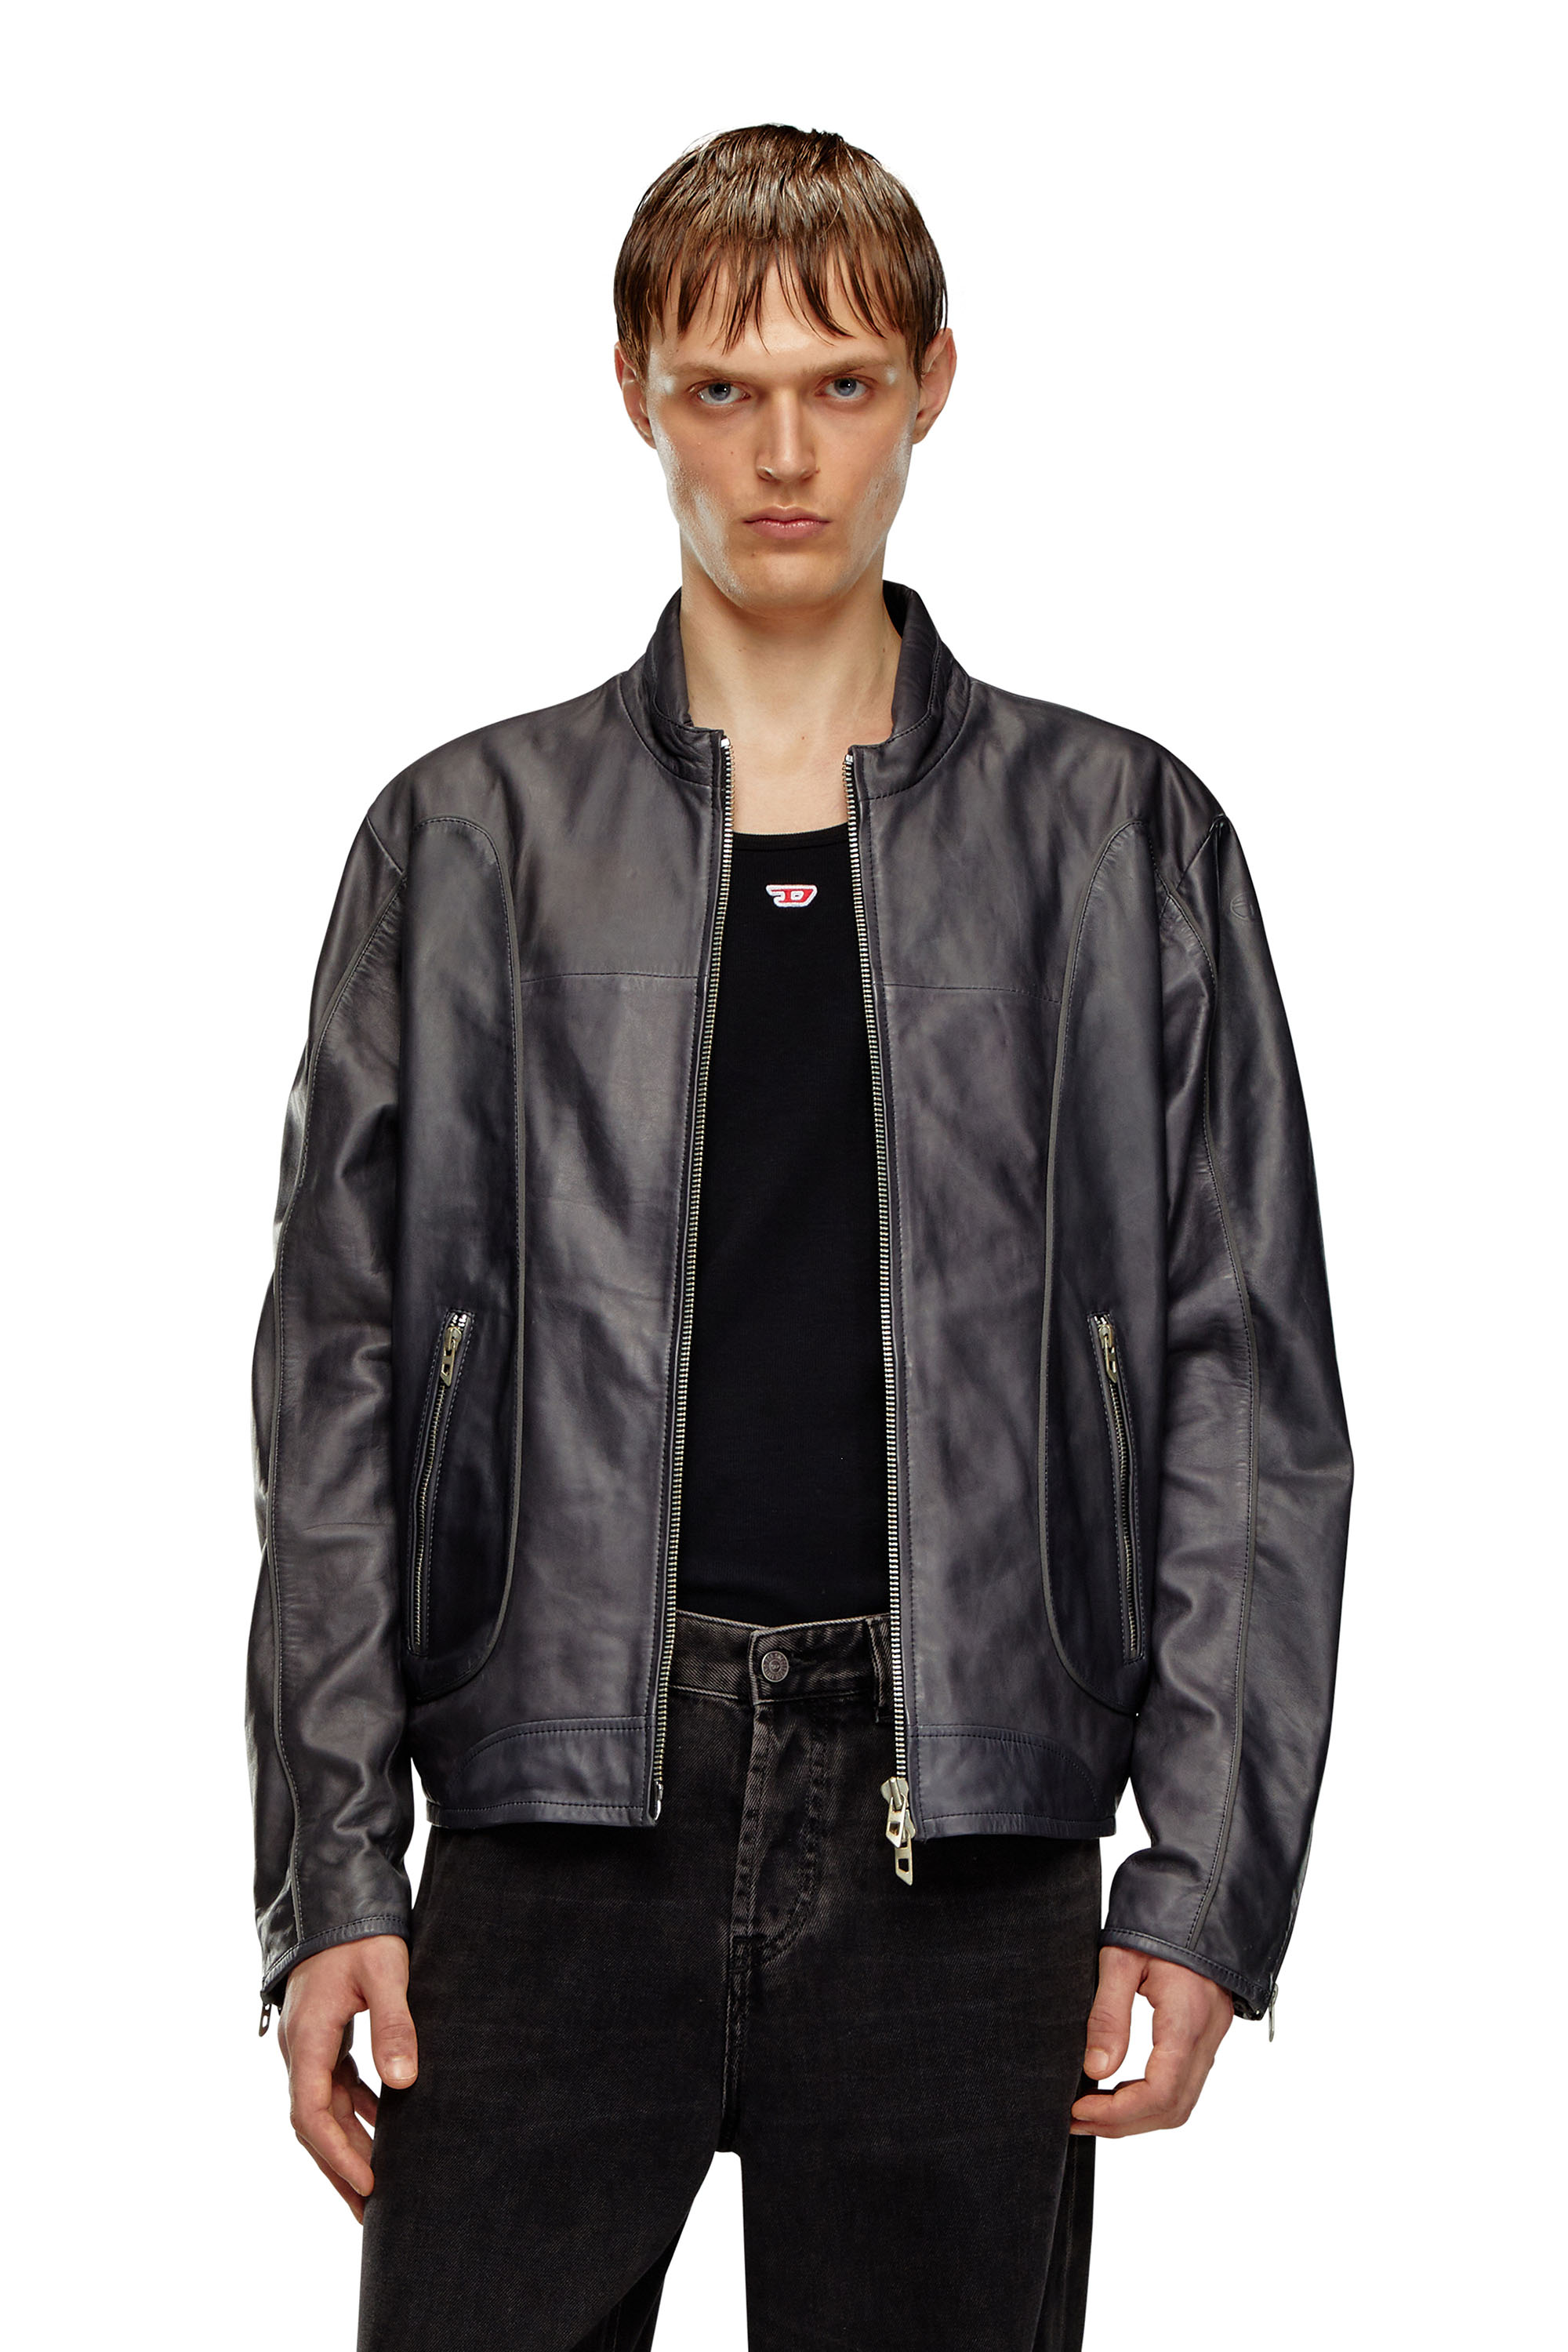 diesel leather tailord jacket black | camillevieraservices.com